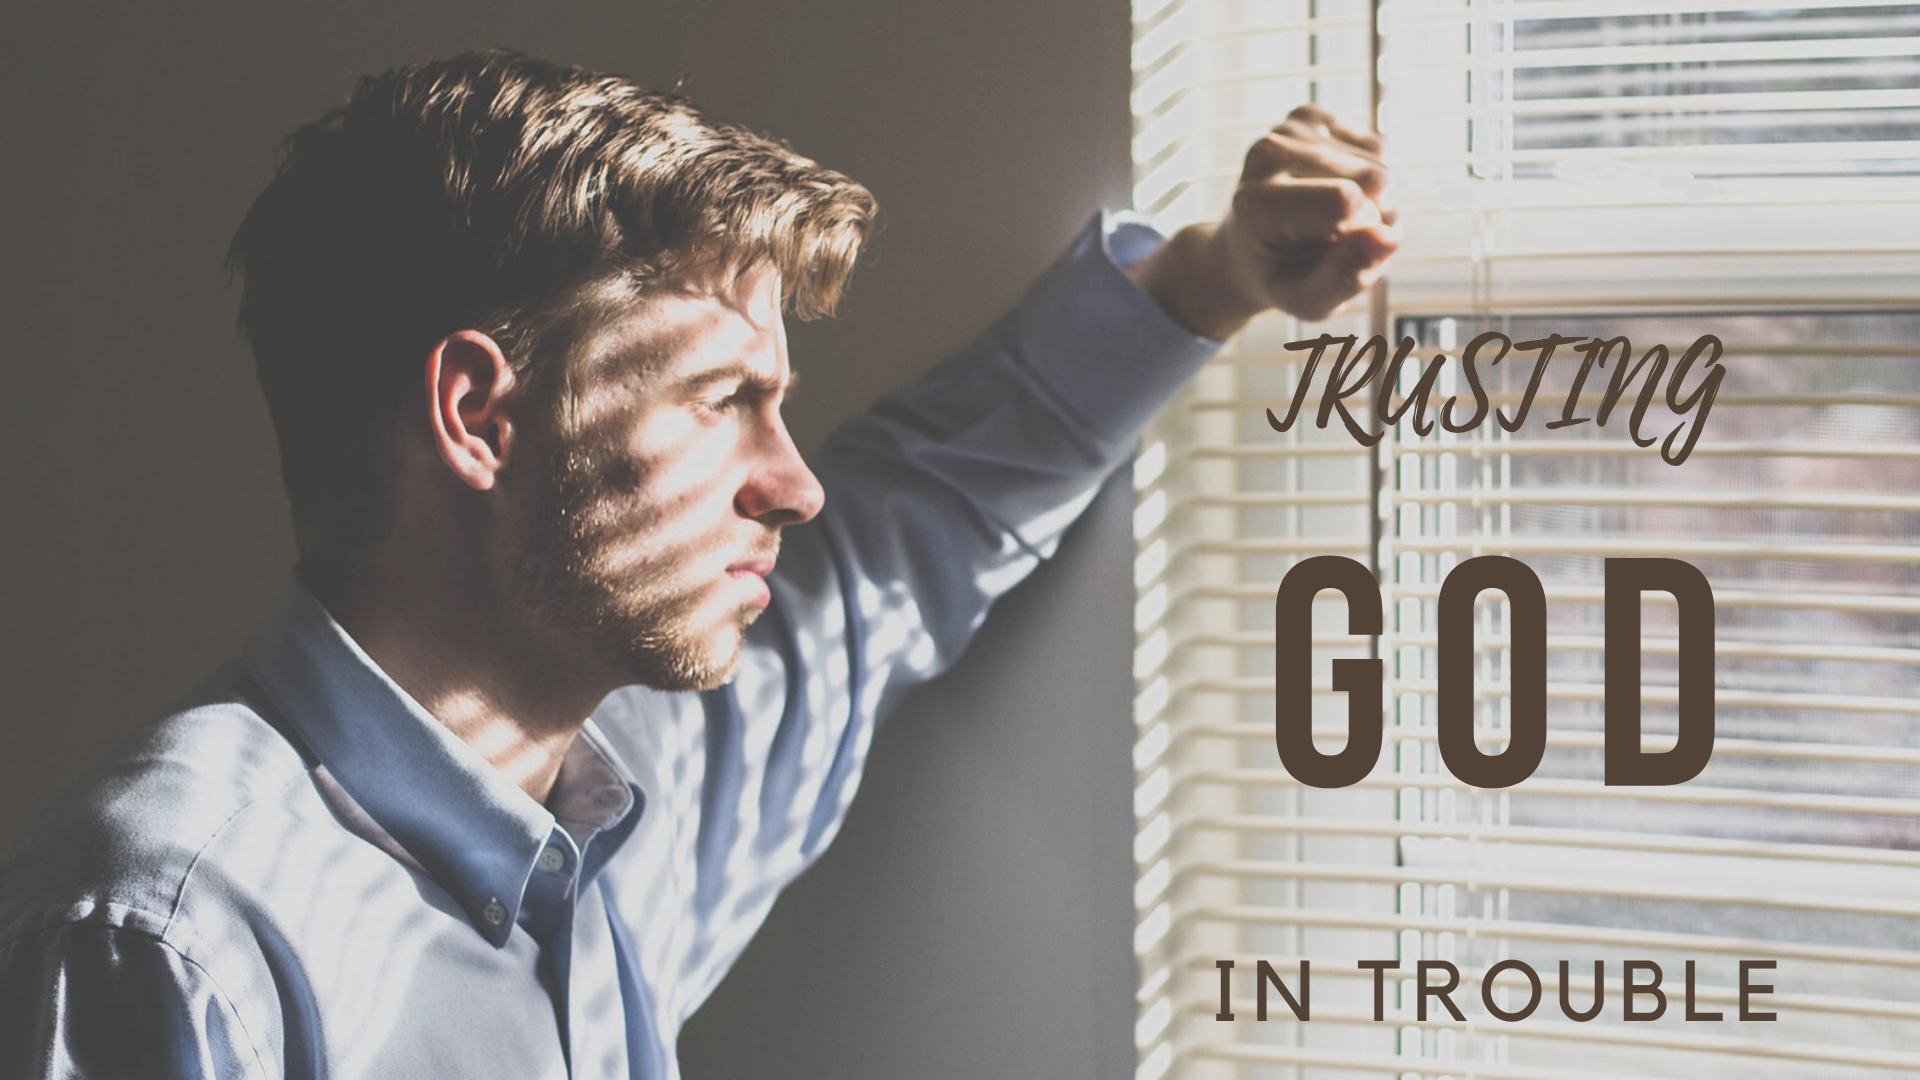 Trusting God in trouble